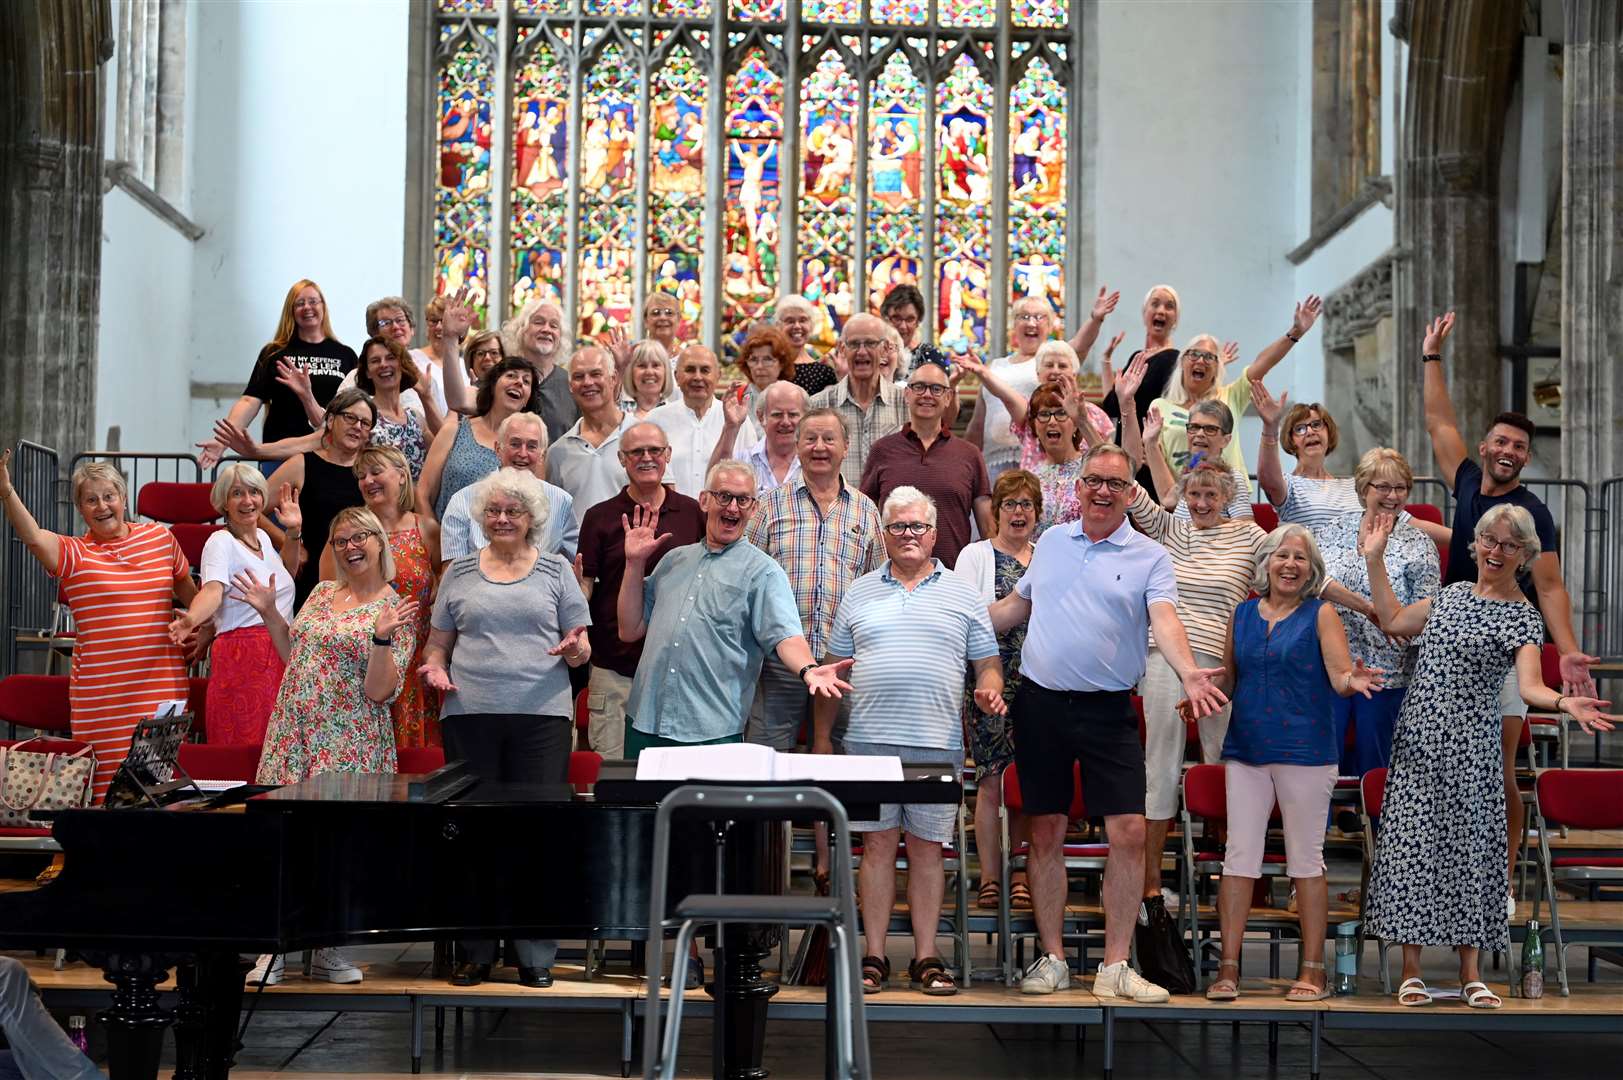 Members of King’s Lynn Festival Chorus performed as part of a workshop of Gilbert & Sullivan favourites ahead of their forthcoming concert this weekend